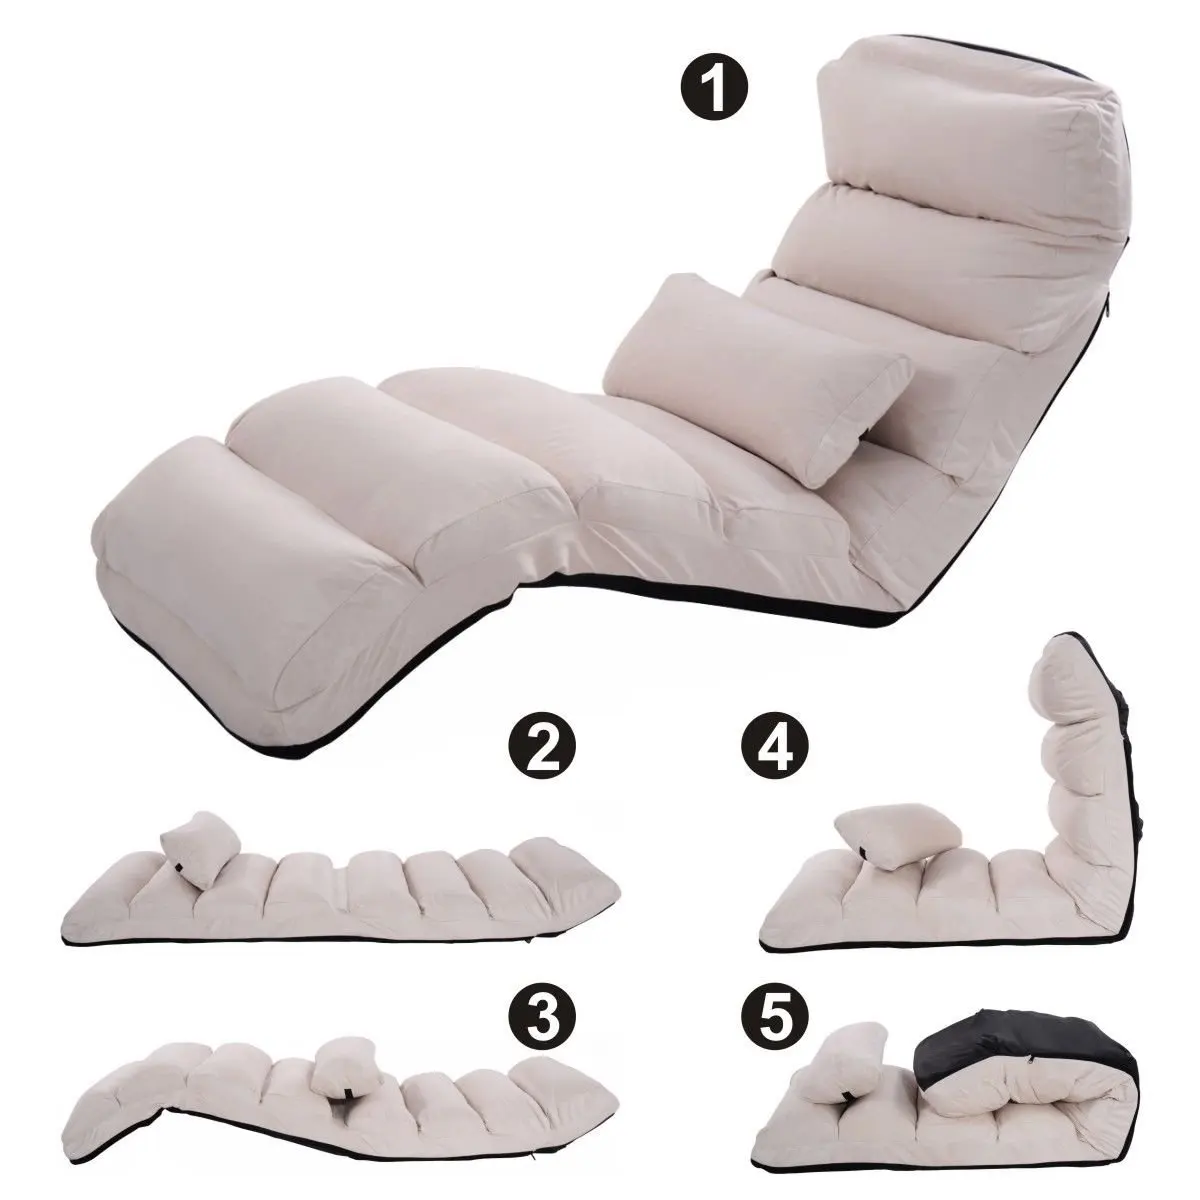 Cheap Lazy Chair Ikea Find Lazy Chair Ikea Deals On Line At Alibaba Com